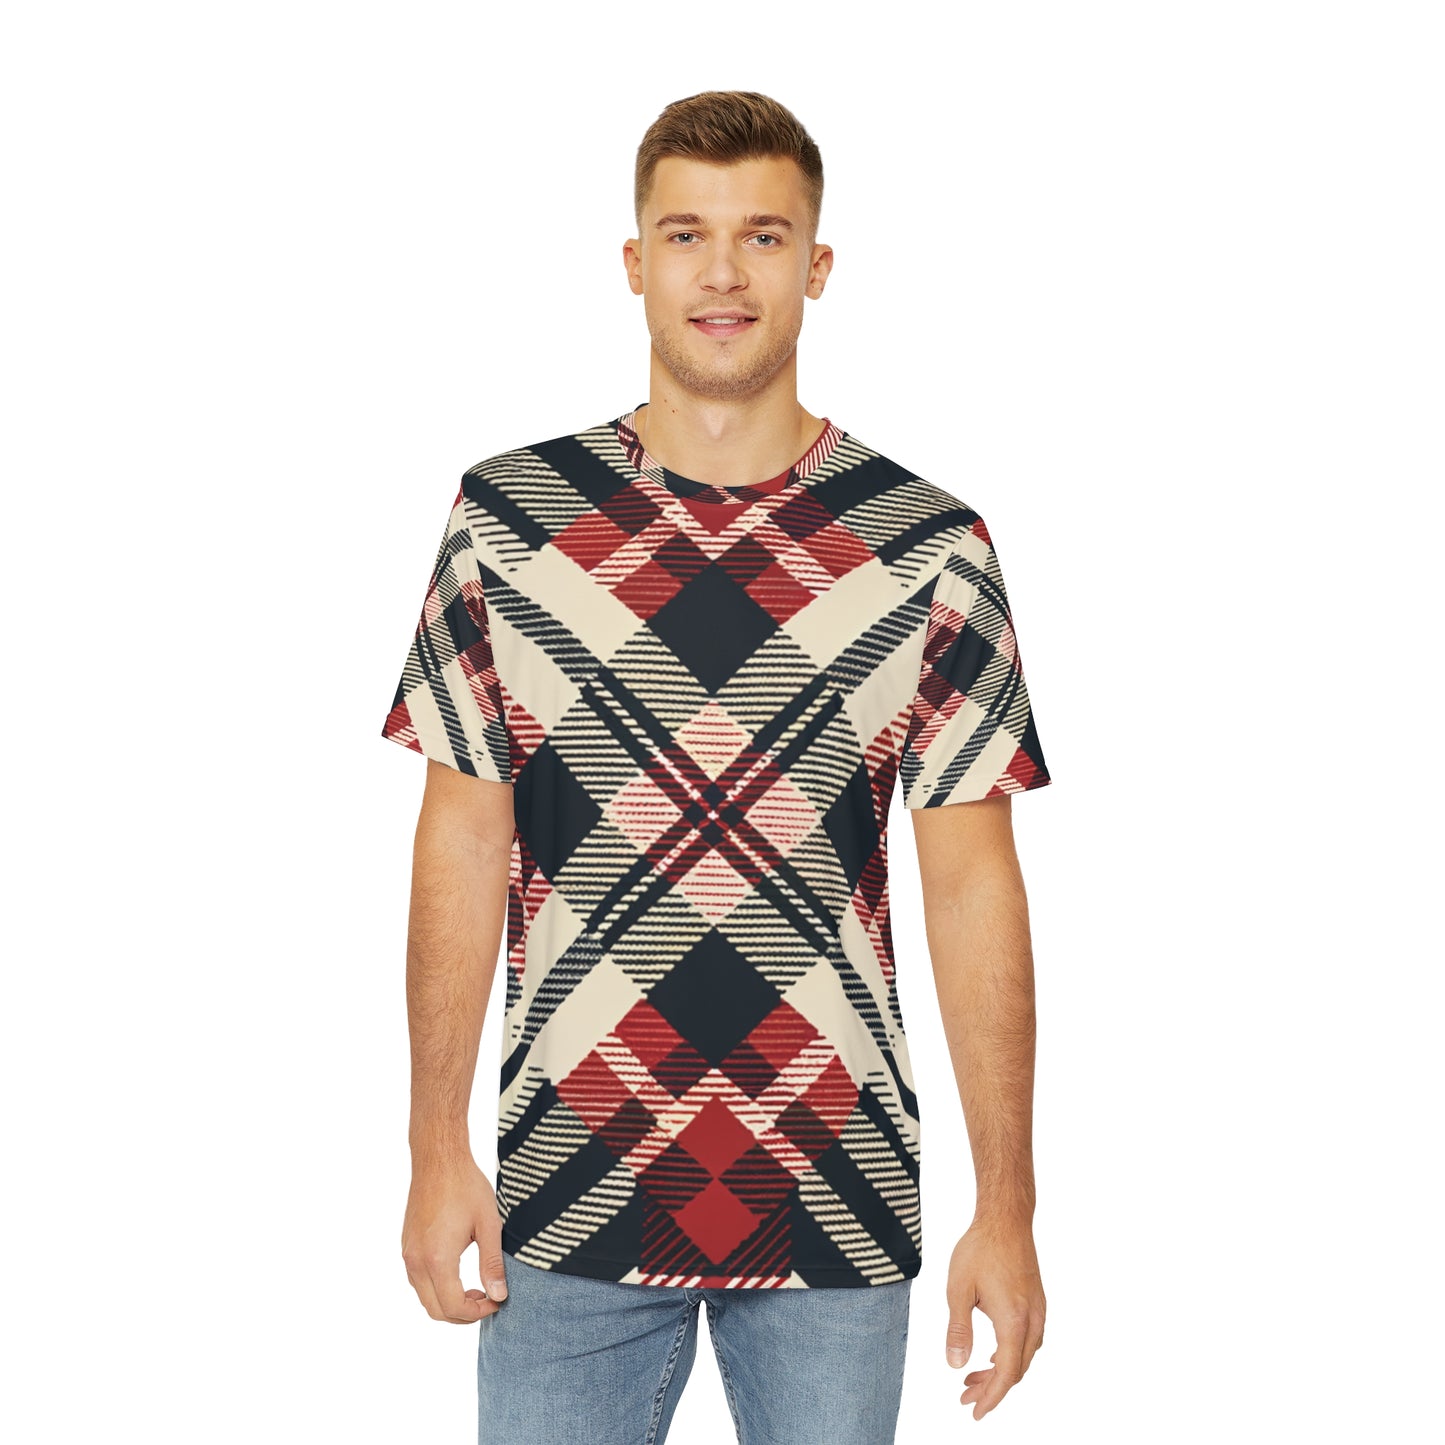 Front view of the Crimson Crosshatch Elegance Crewneck Pullover All-Over Print Short-Sleeved Shirt red black beige plaid print paired with casual denim pants worn by white man